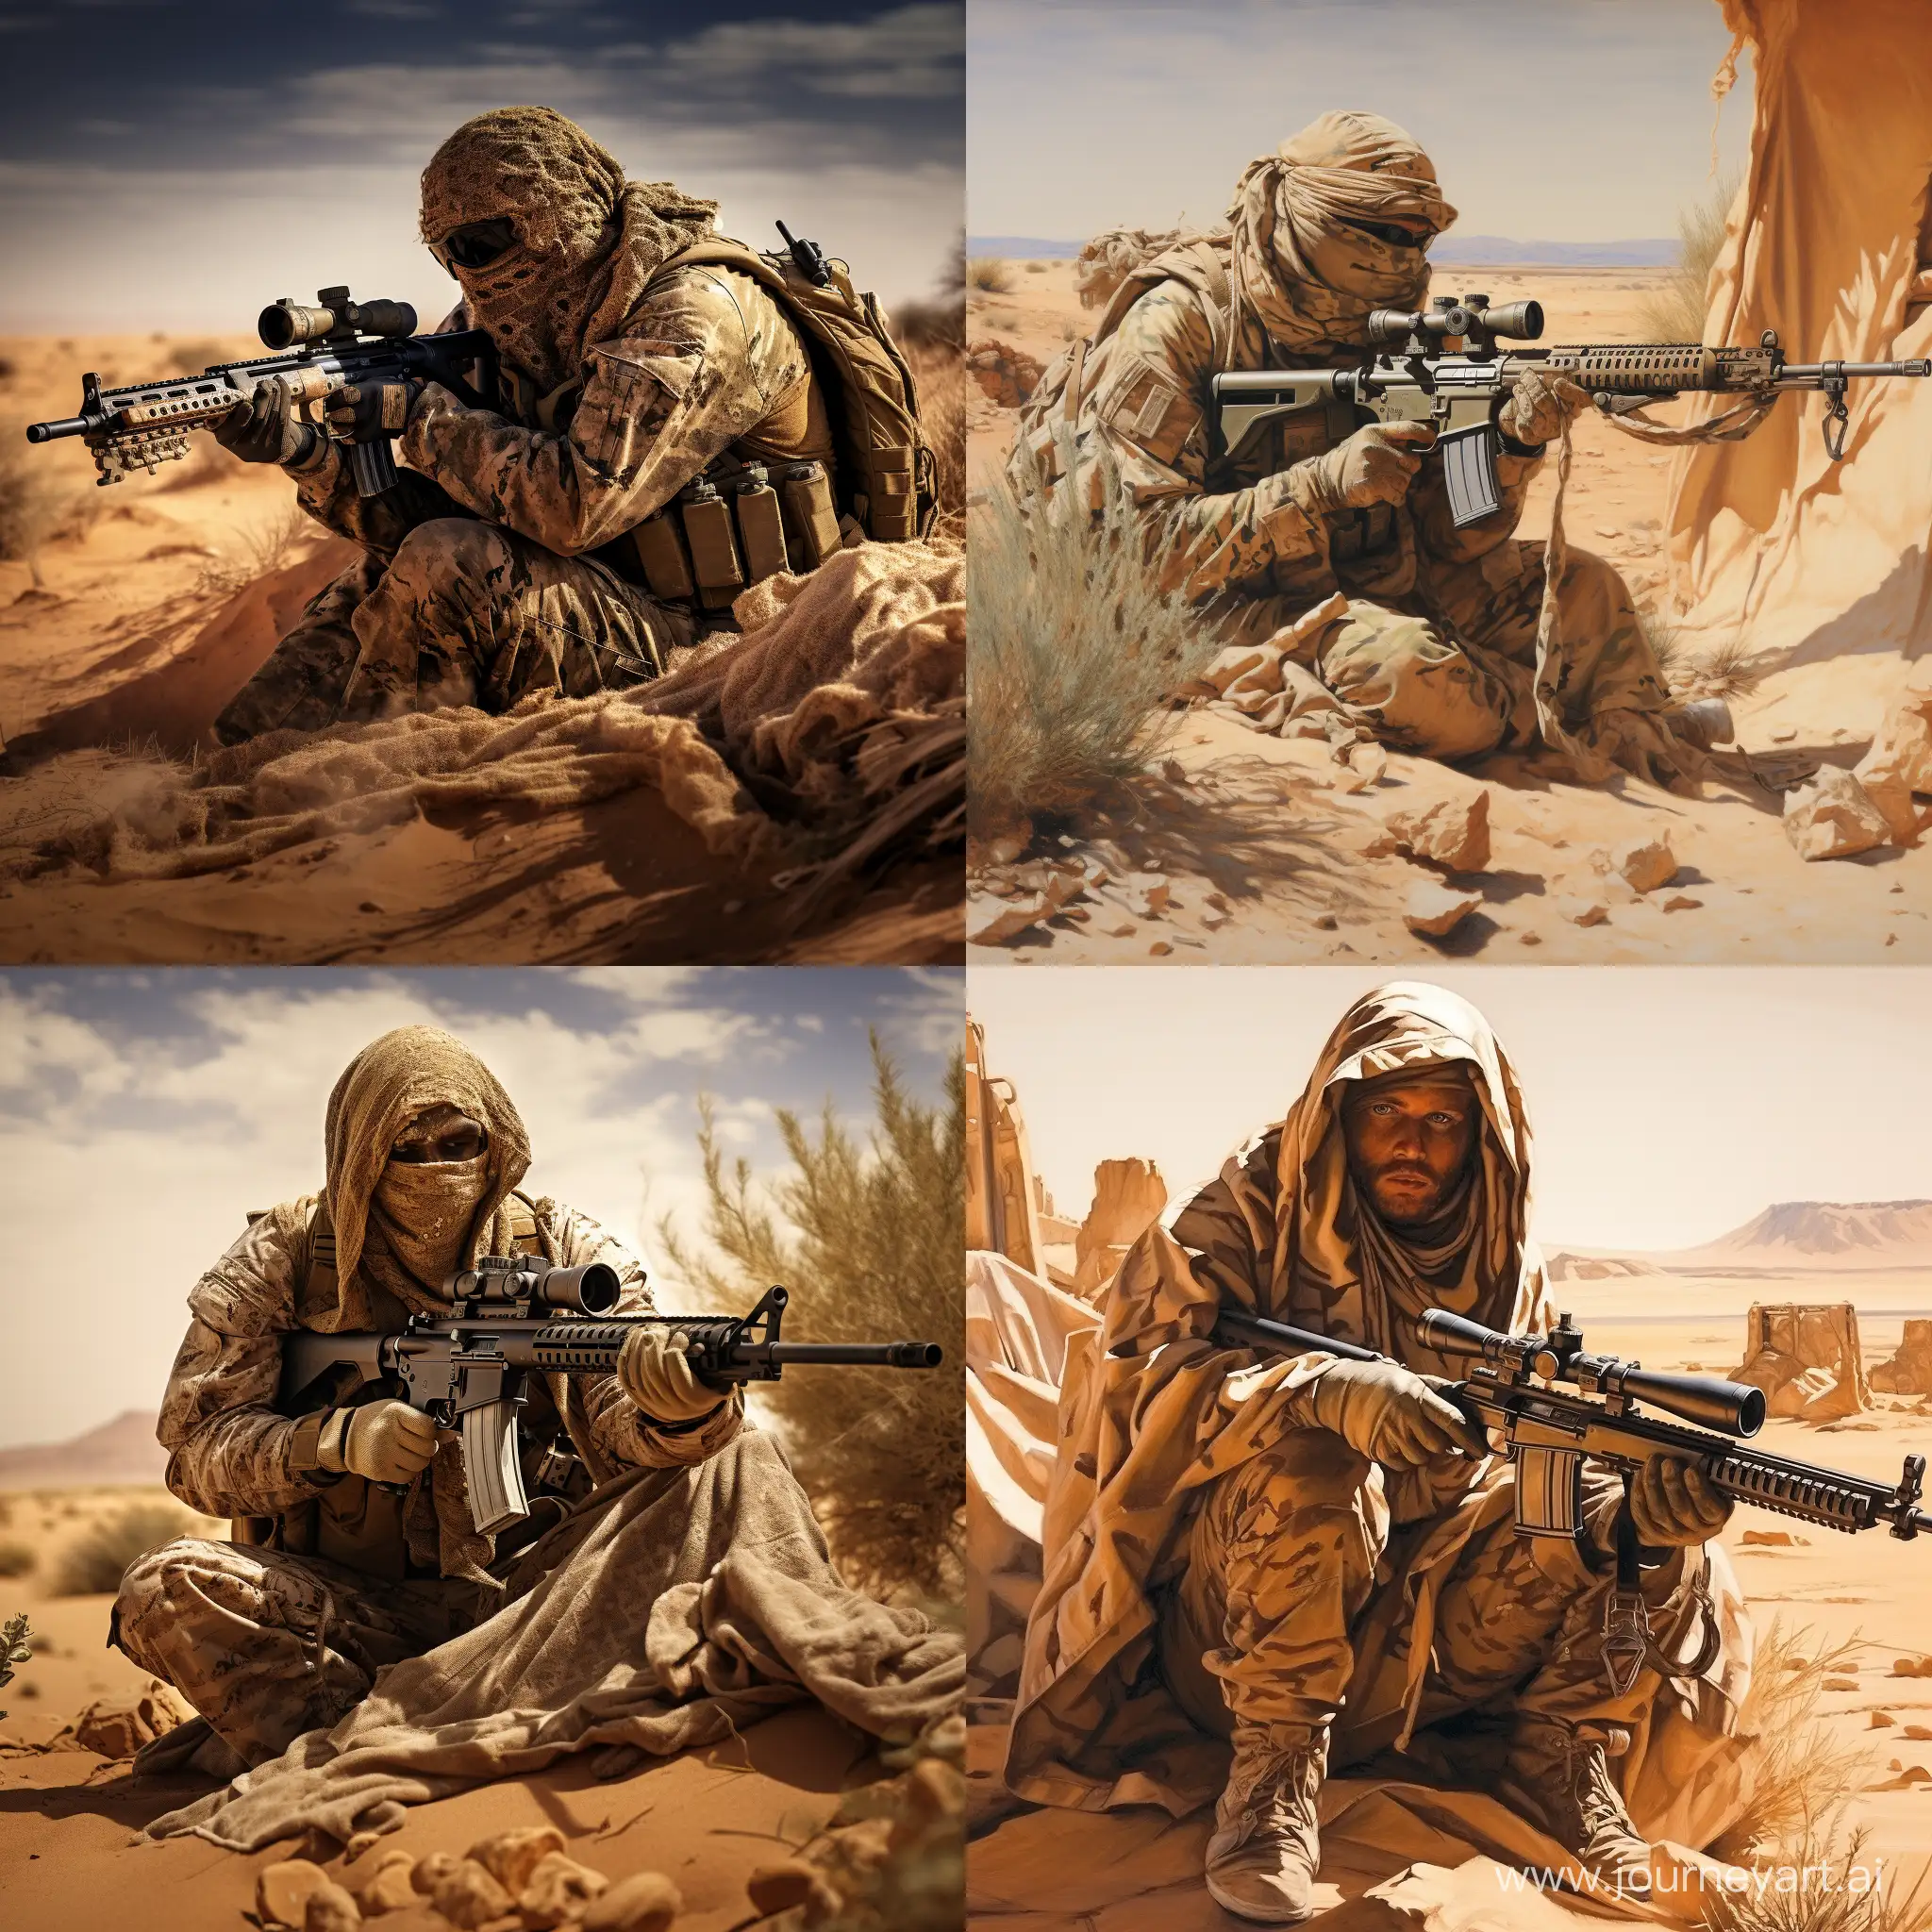 Stealthy-Sniper-in-African-Desert-Camouflage-Takes-Aim